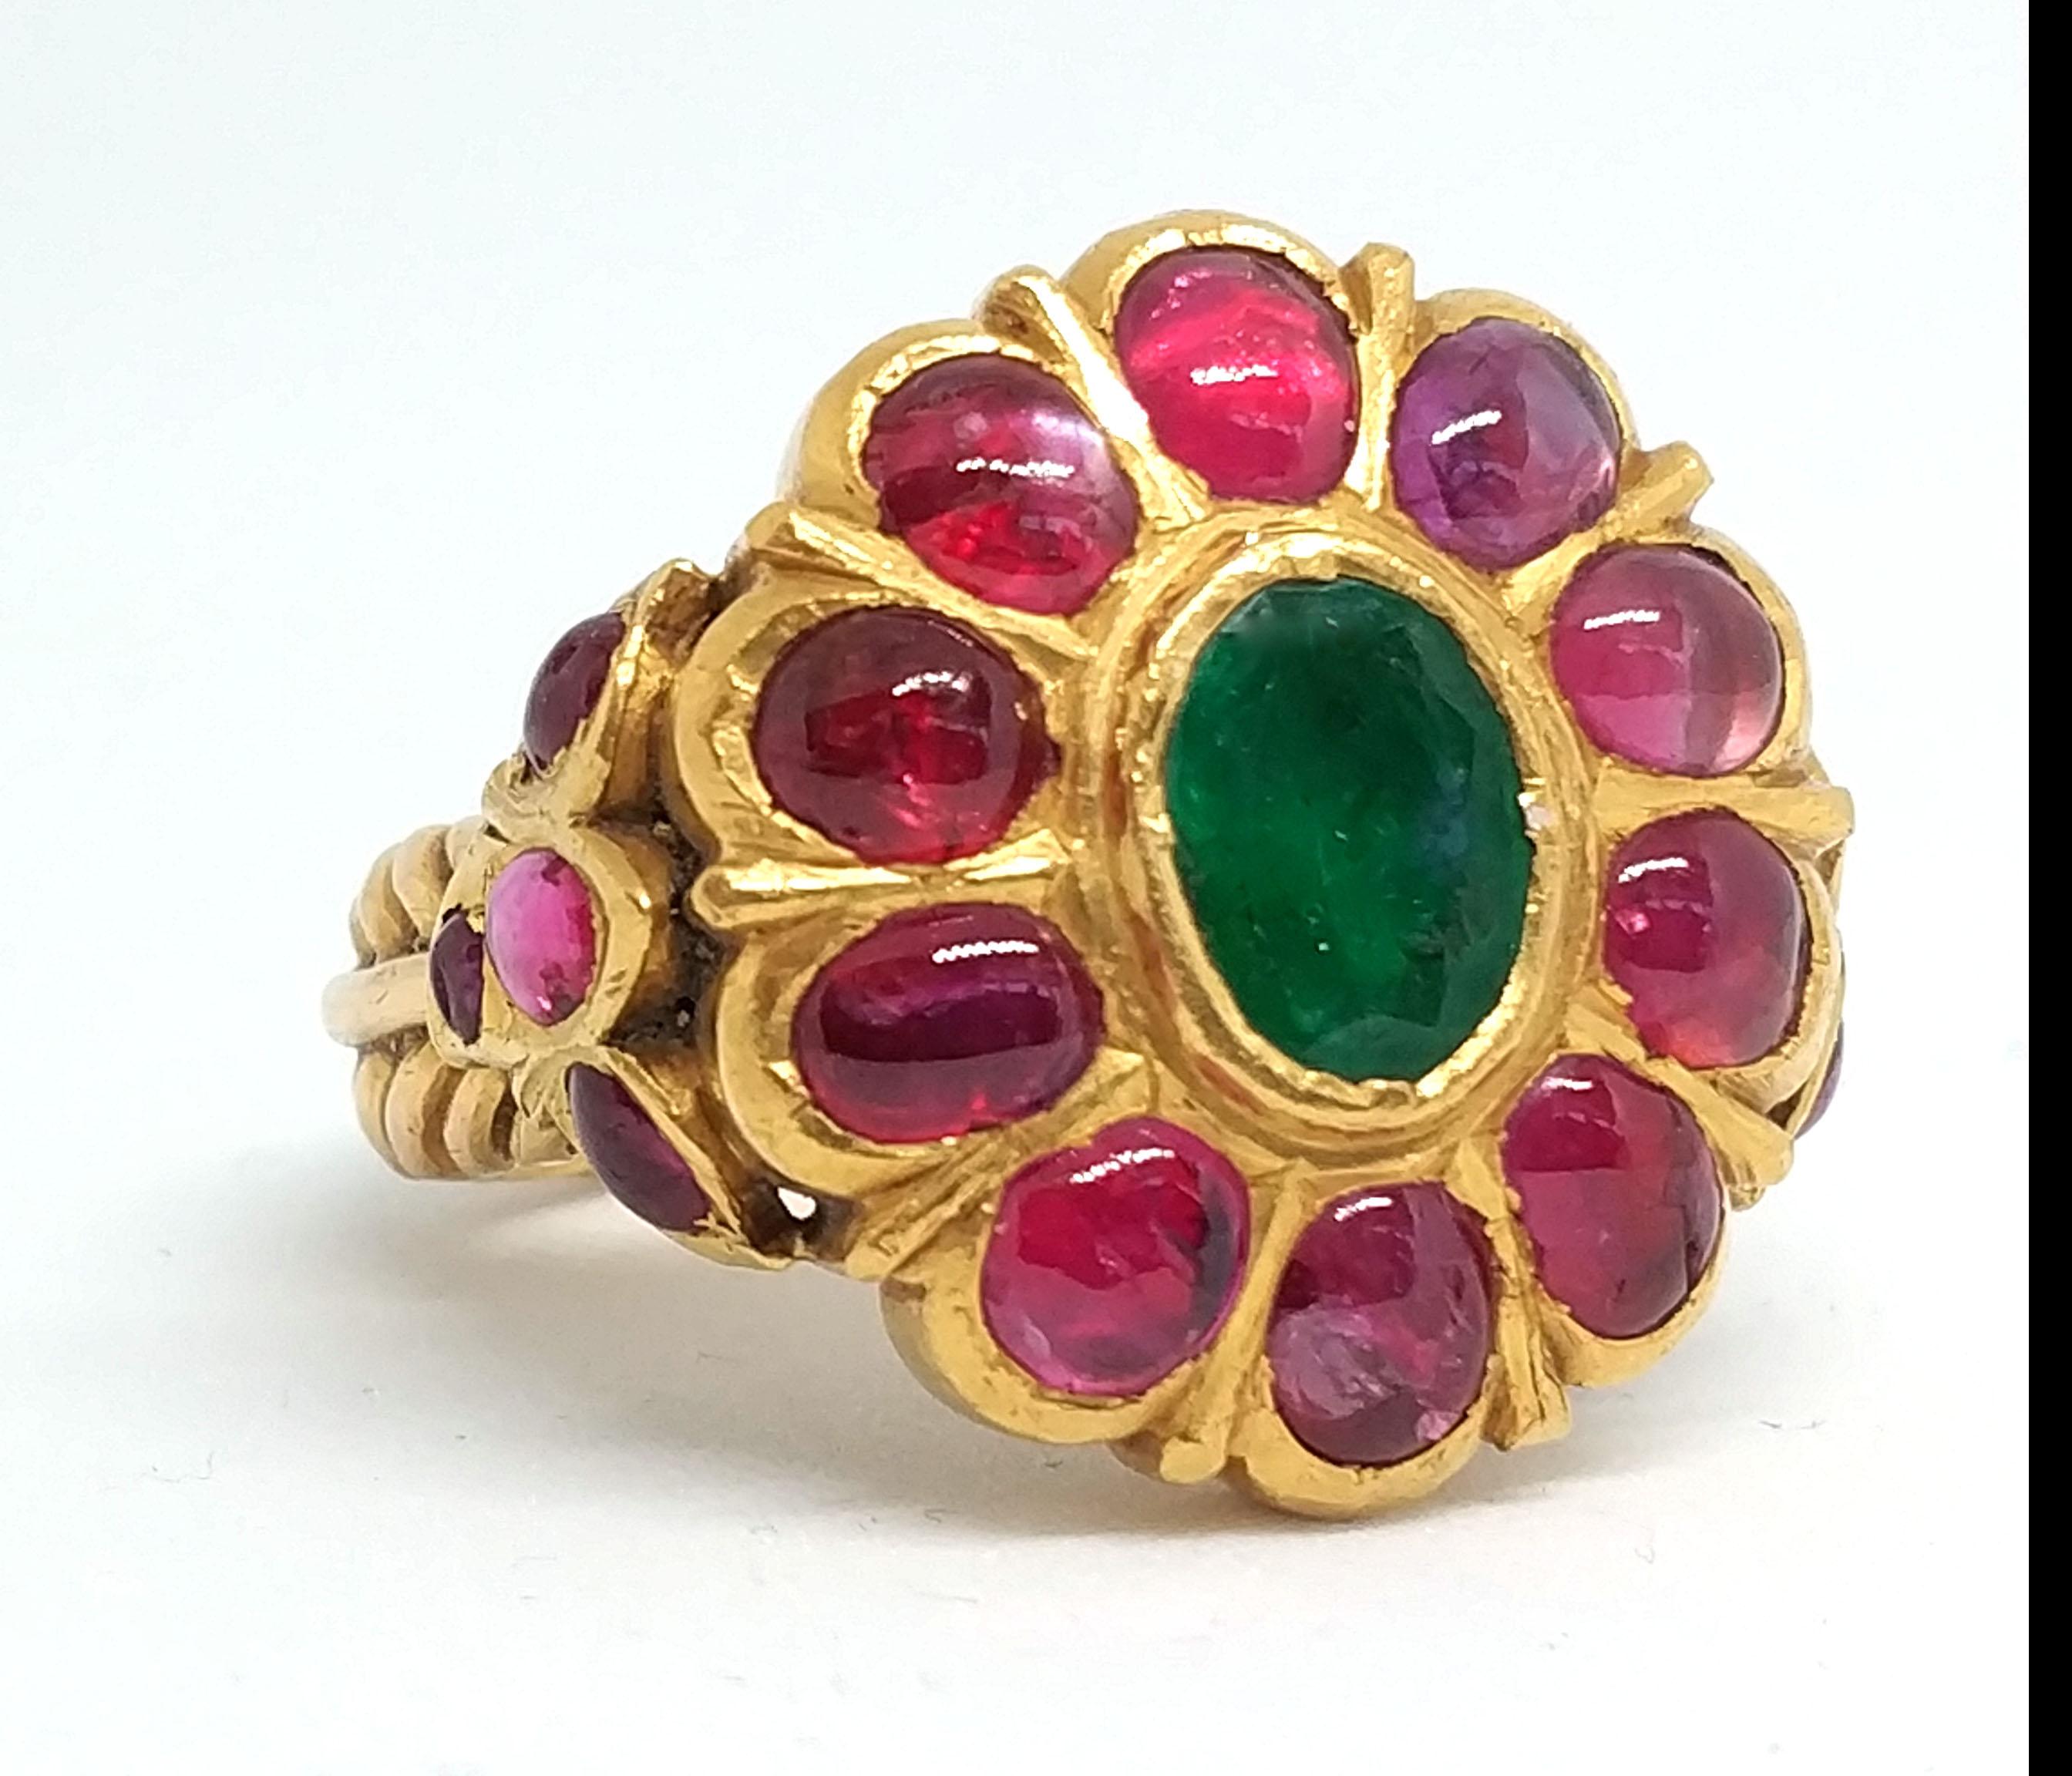 Extremely beautiful antique ring circa early 20th century
Possibly Indian/ Persian origin as per experts of a famous auction house 
Almost 5.5 carat ruby and 3 carat emerald
Weight of gemstones is an approximate because the stones cannot be taken